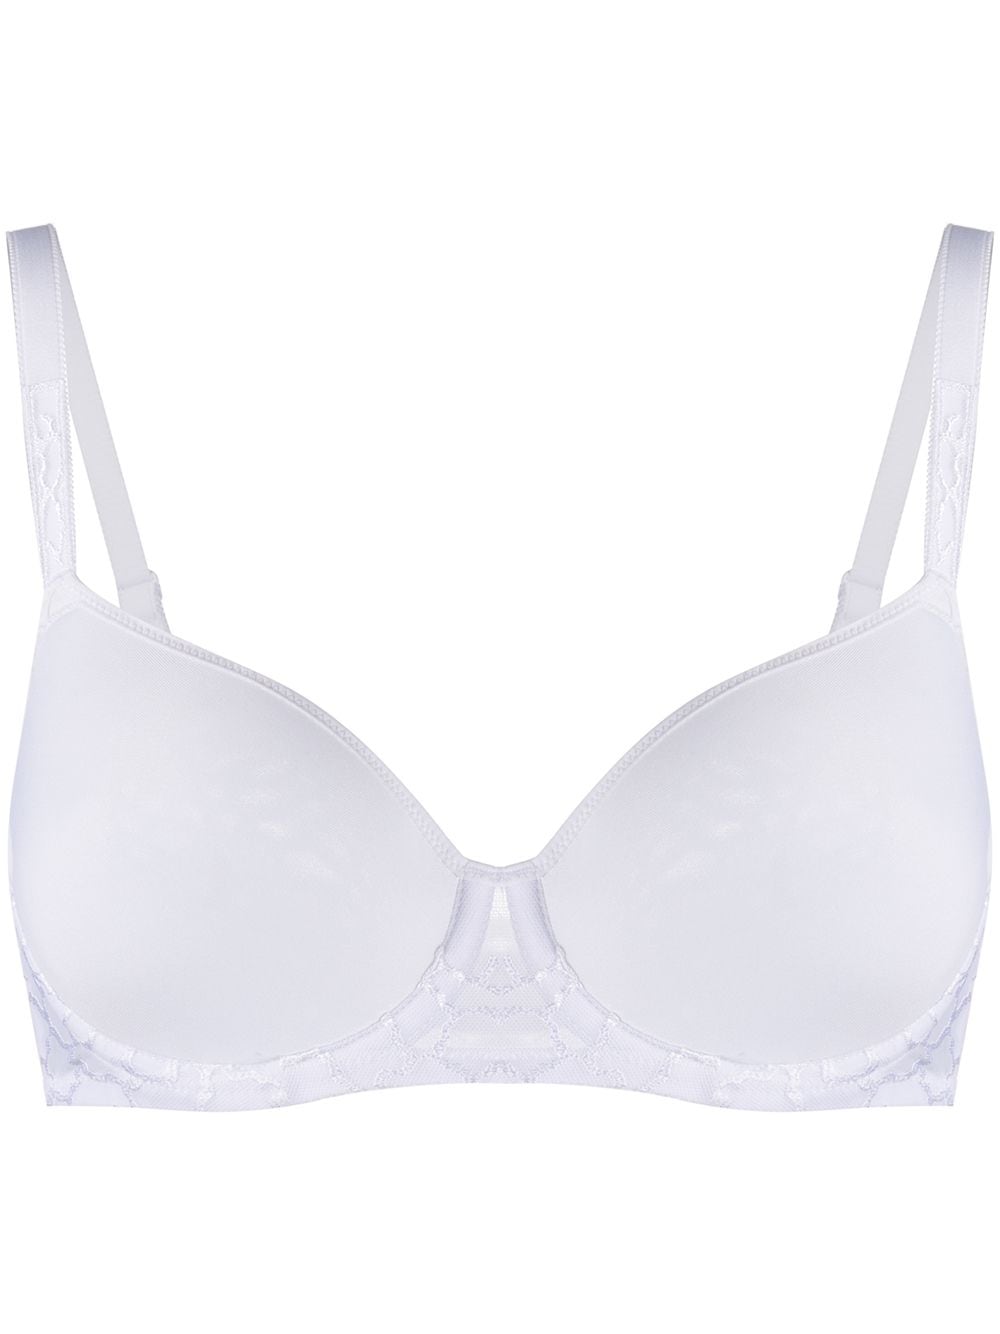 Wacoal Lisse moulded cup bra - White von Wacoal